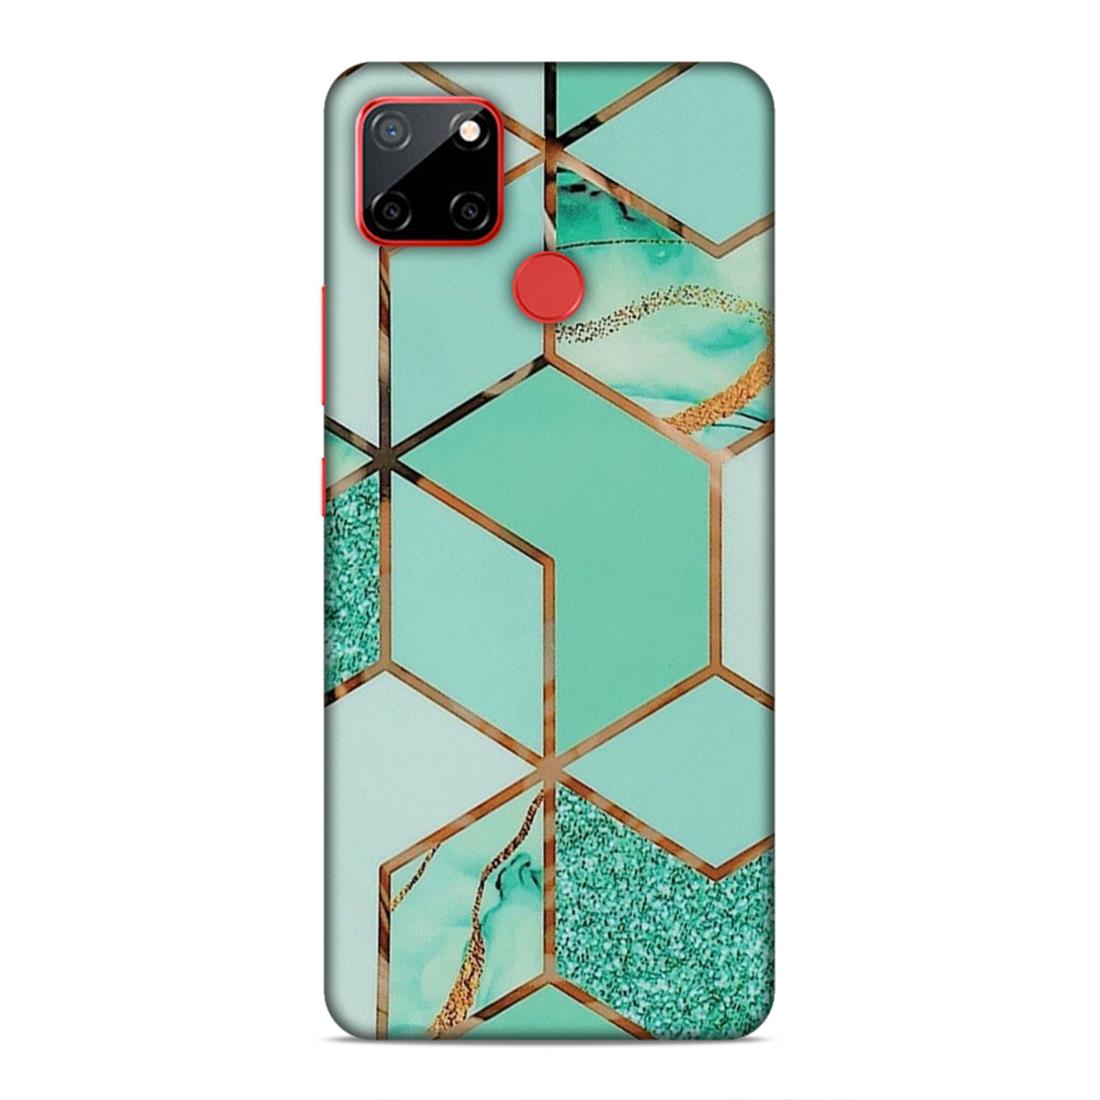 Hexagonal Marble Pattern Hard Back Case For Realme C12 / C25 / C25s / Narzo 20 / 30A